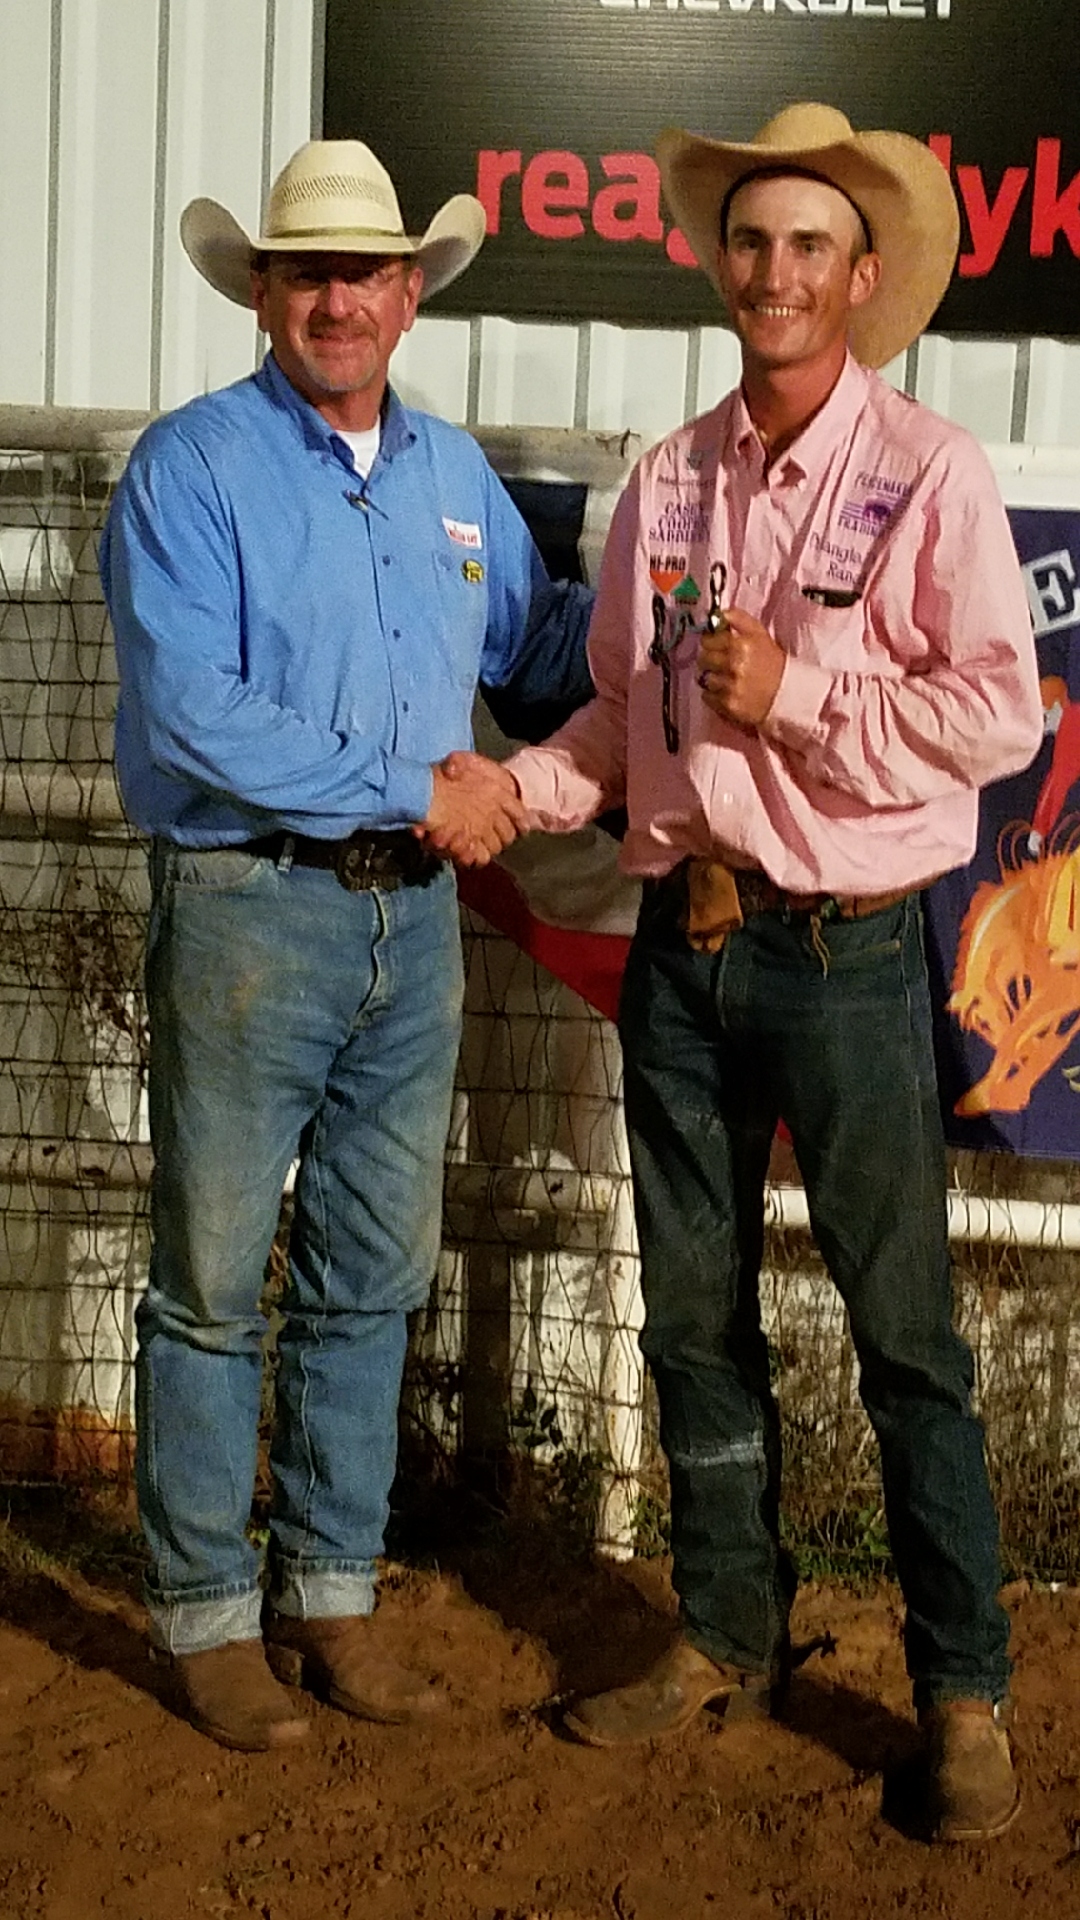 2017 Old Settler’s Reunion Ranch Rodeo Honorary Top Hand Kye Fuston, Triangle Ranch / Veale Ranch